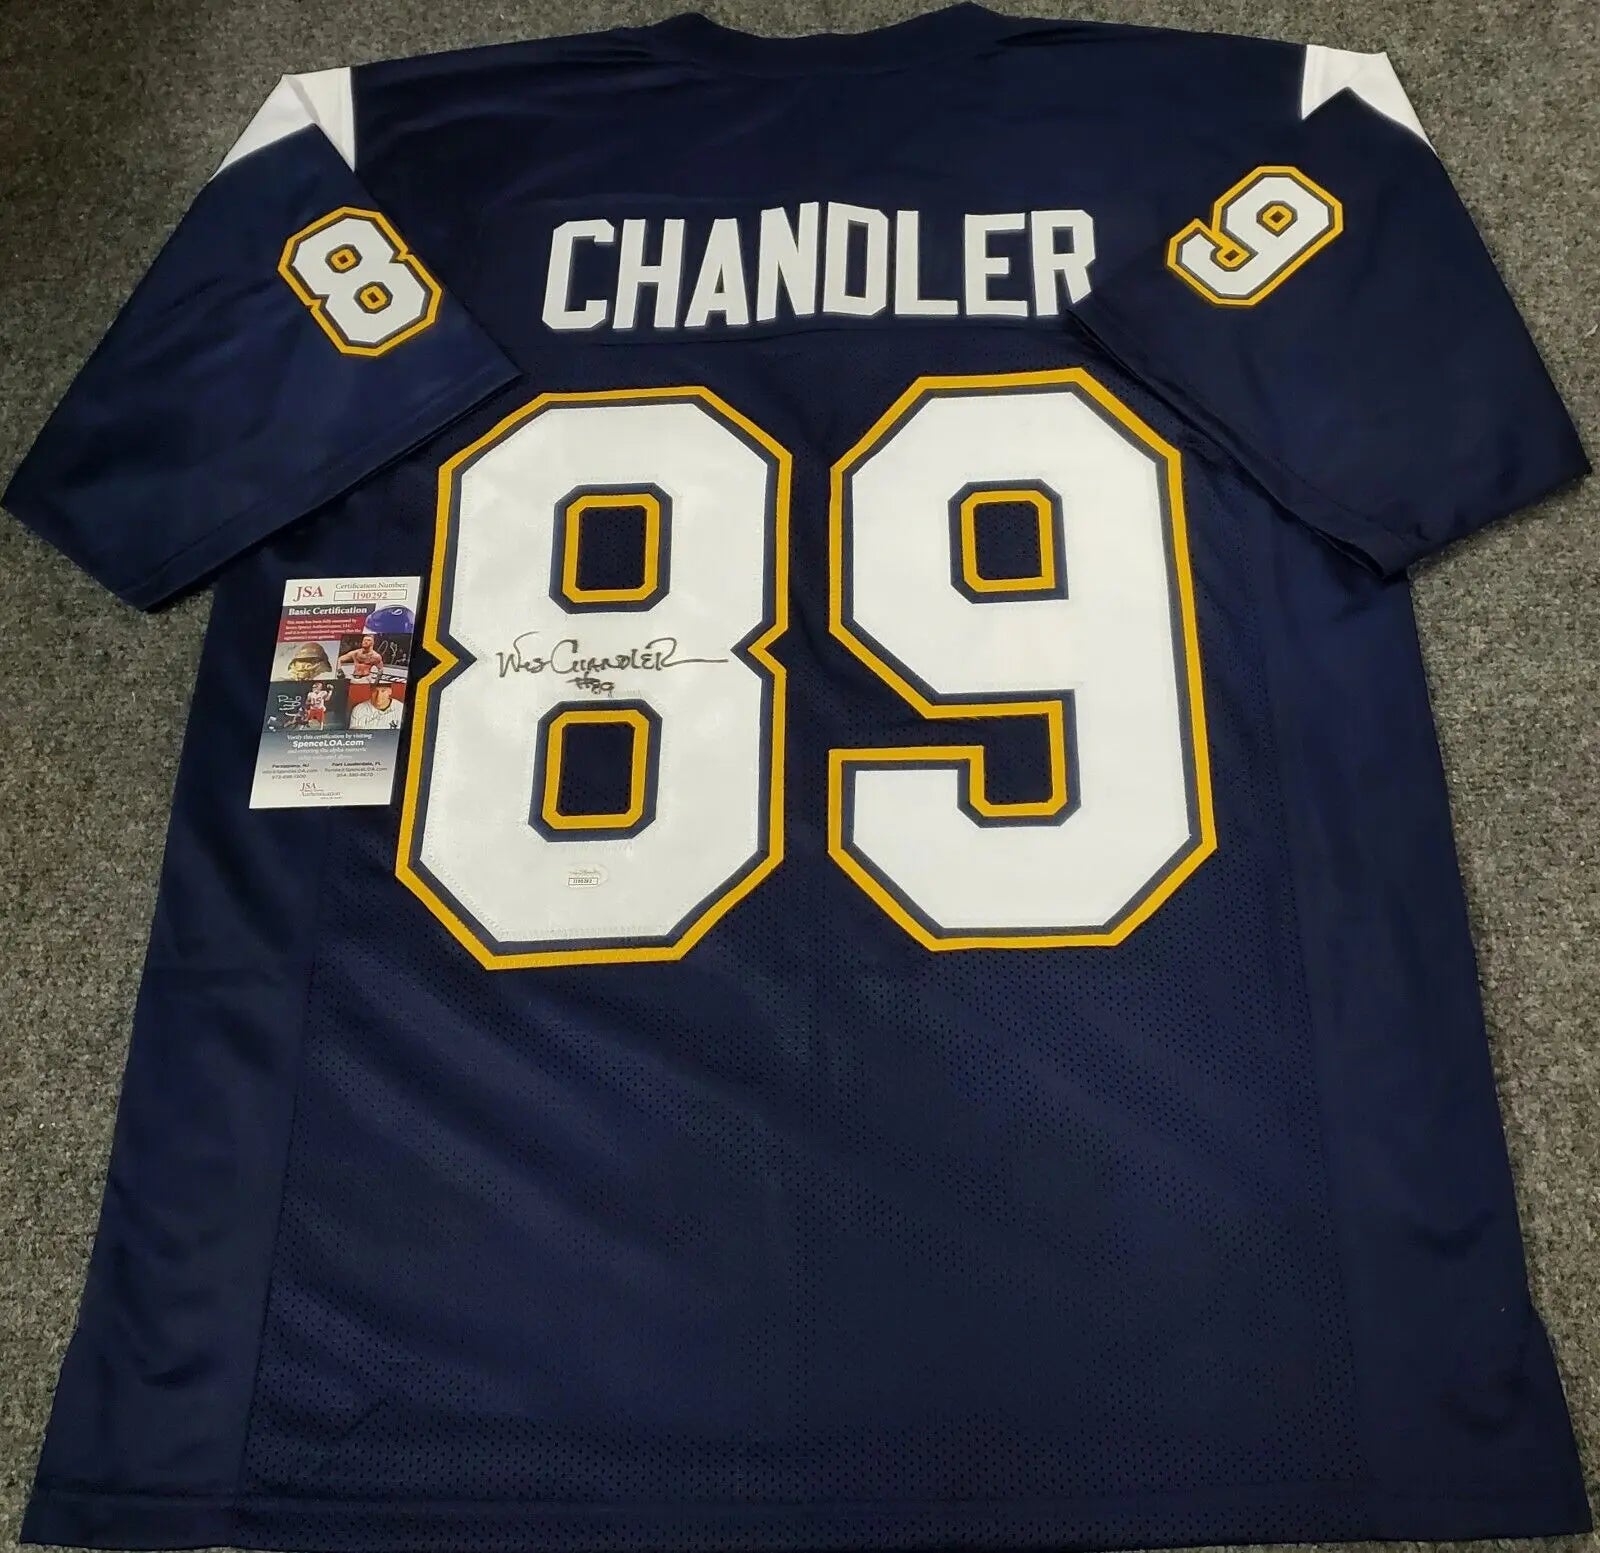 San Diego Chargers Wes Chandler Autographed Signed Jersey Jsa Coa